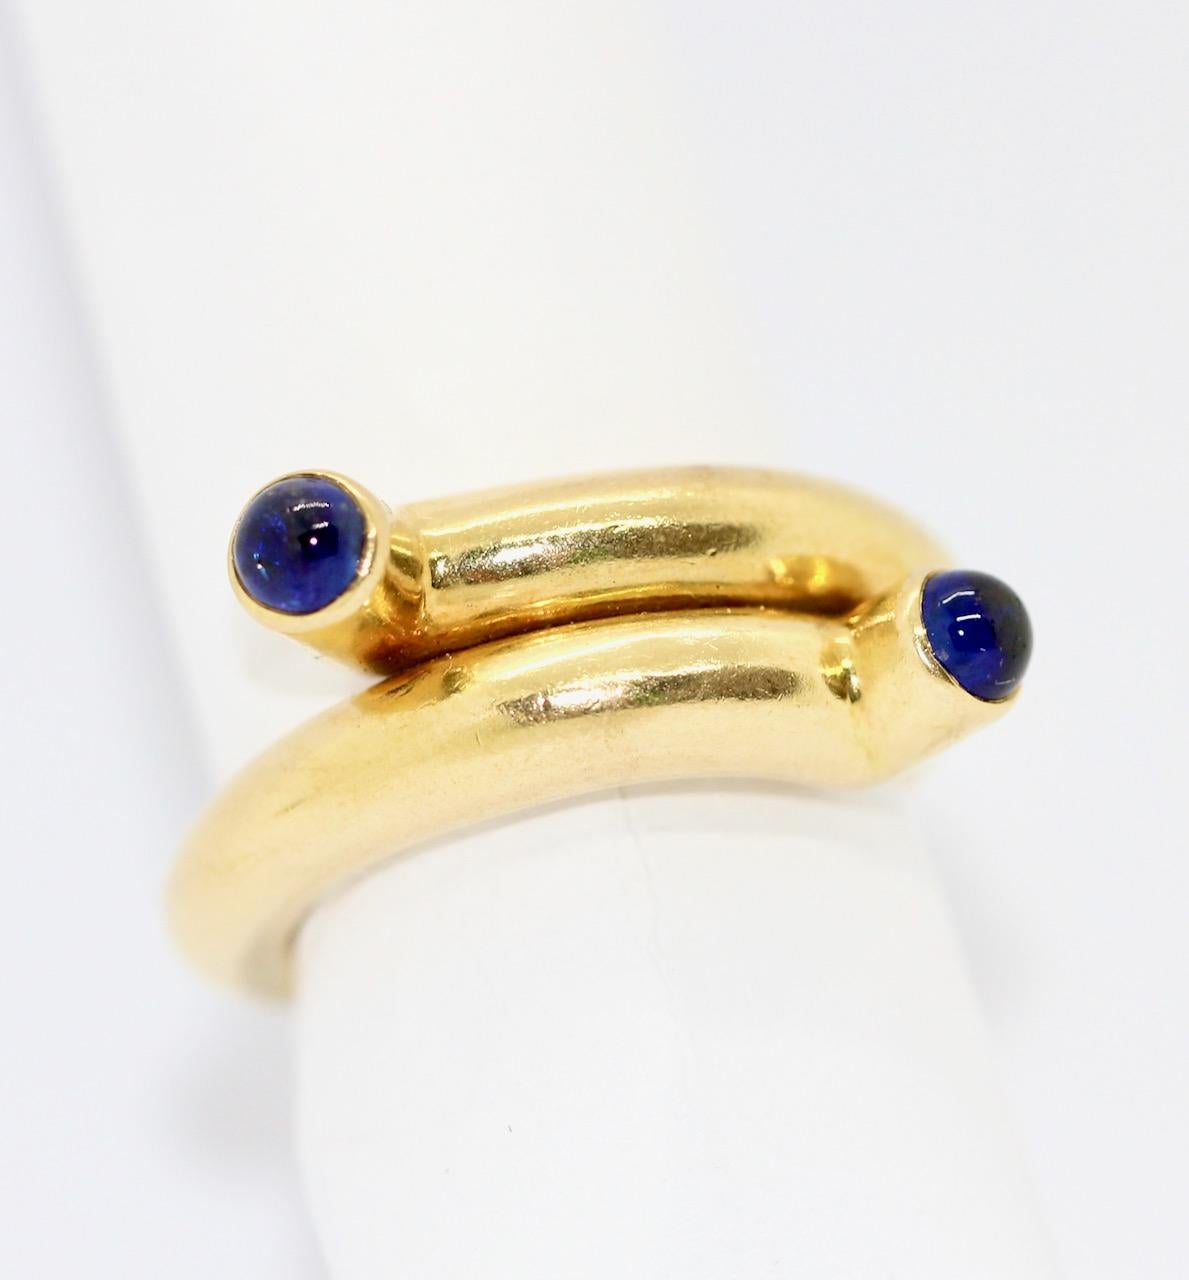 Designer Ring by Tiffany & Co, Jean Schlumberger, 18K Gold, Sapphire Cabochons For Sale 3